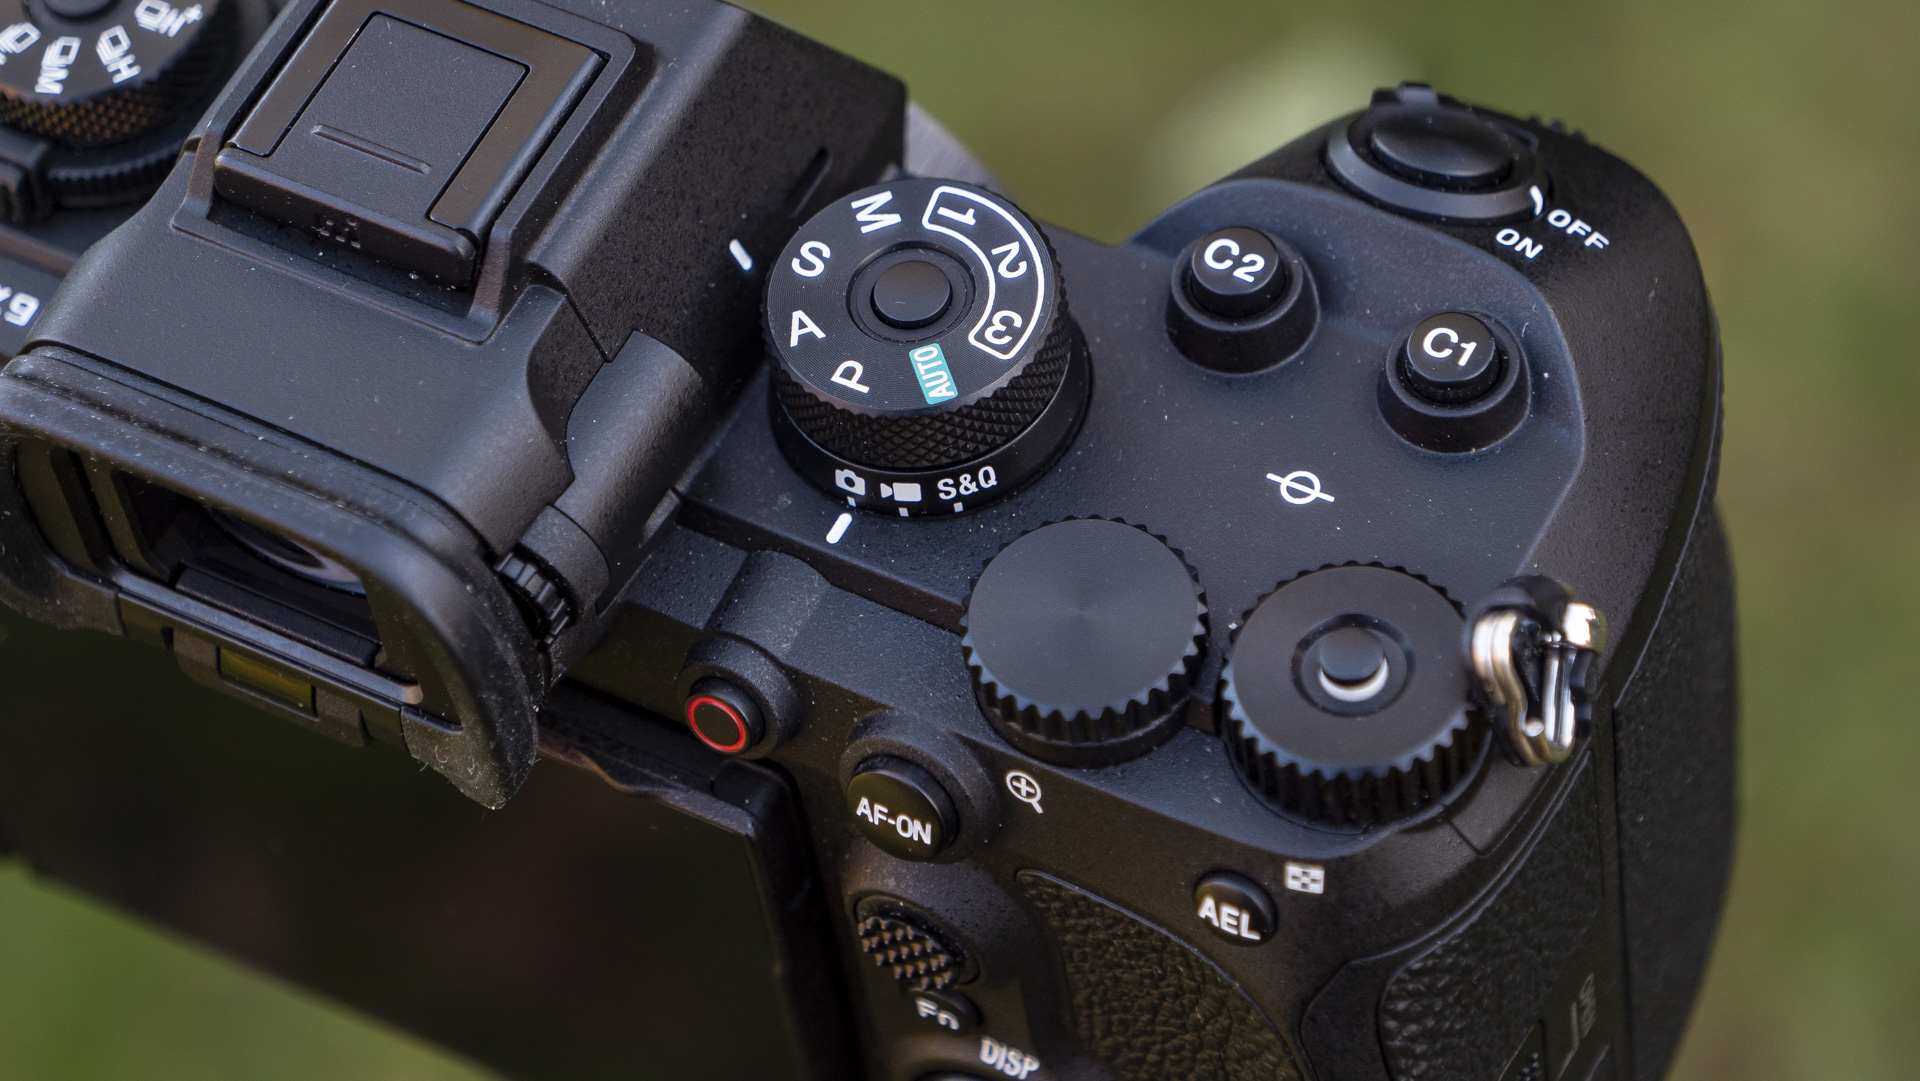 Top dials close up of the Sony A9 III camera